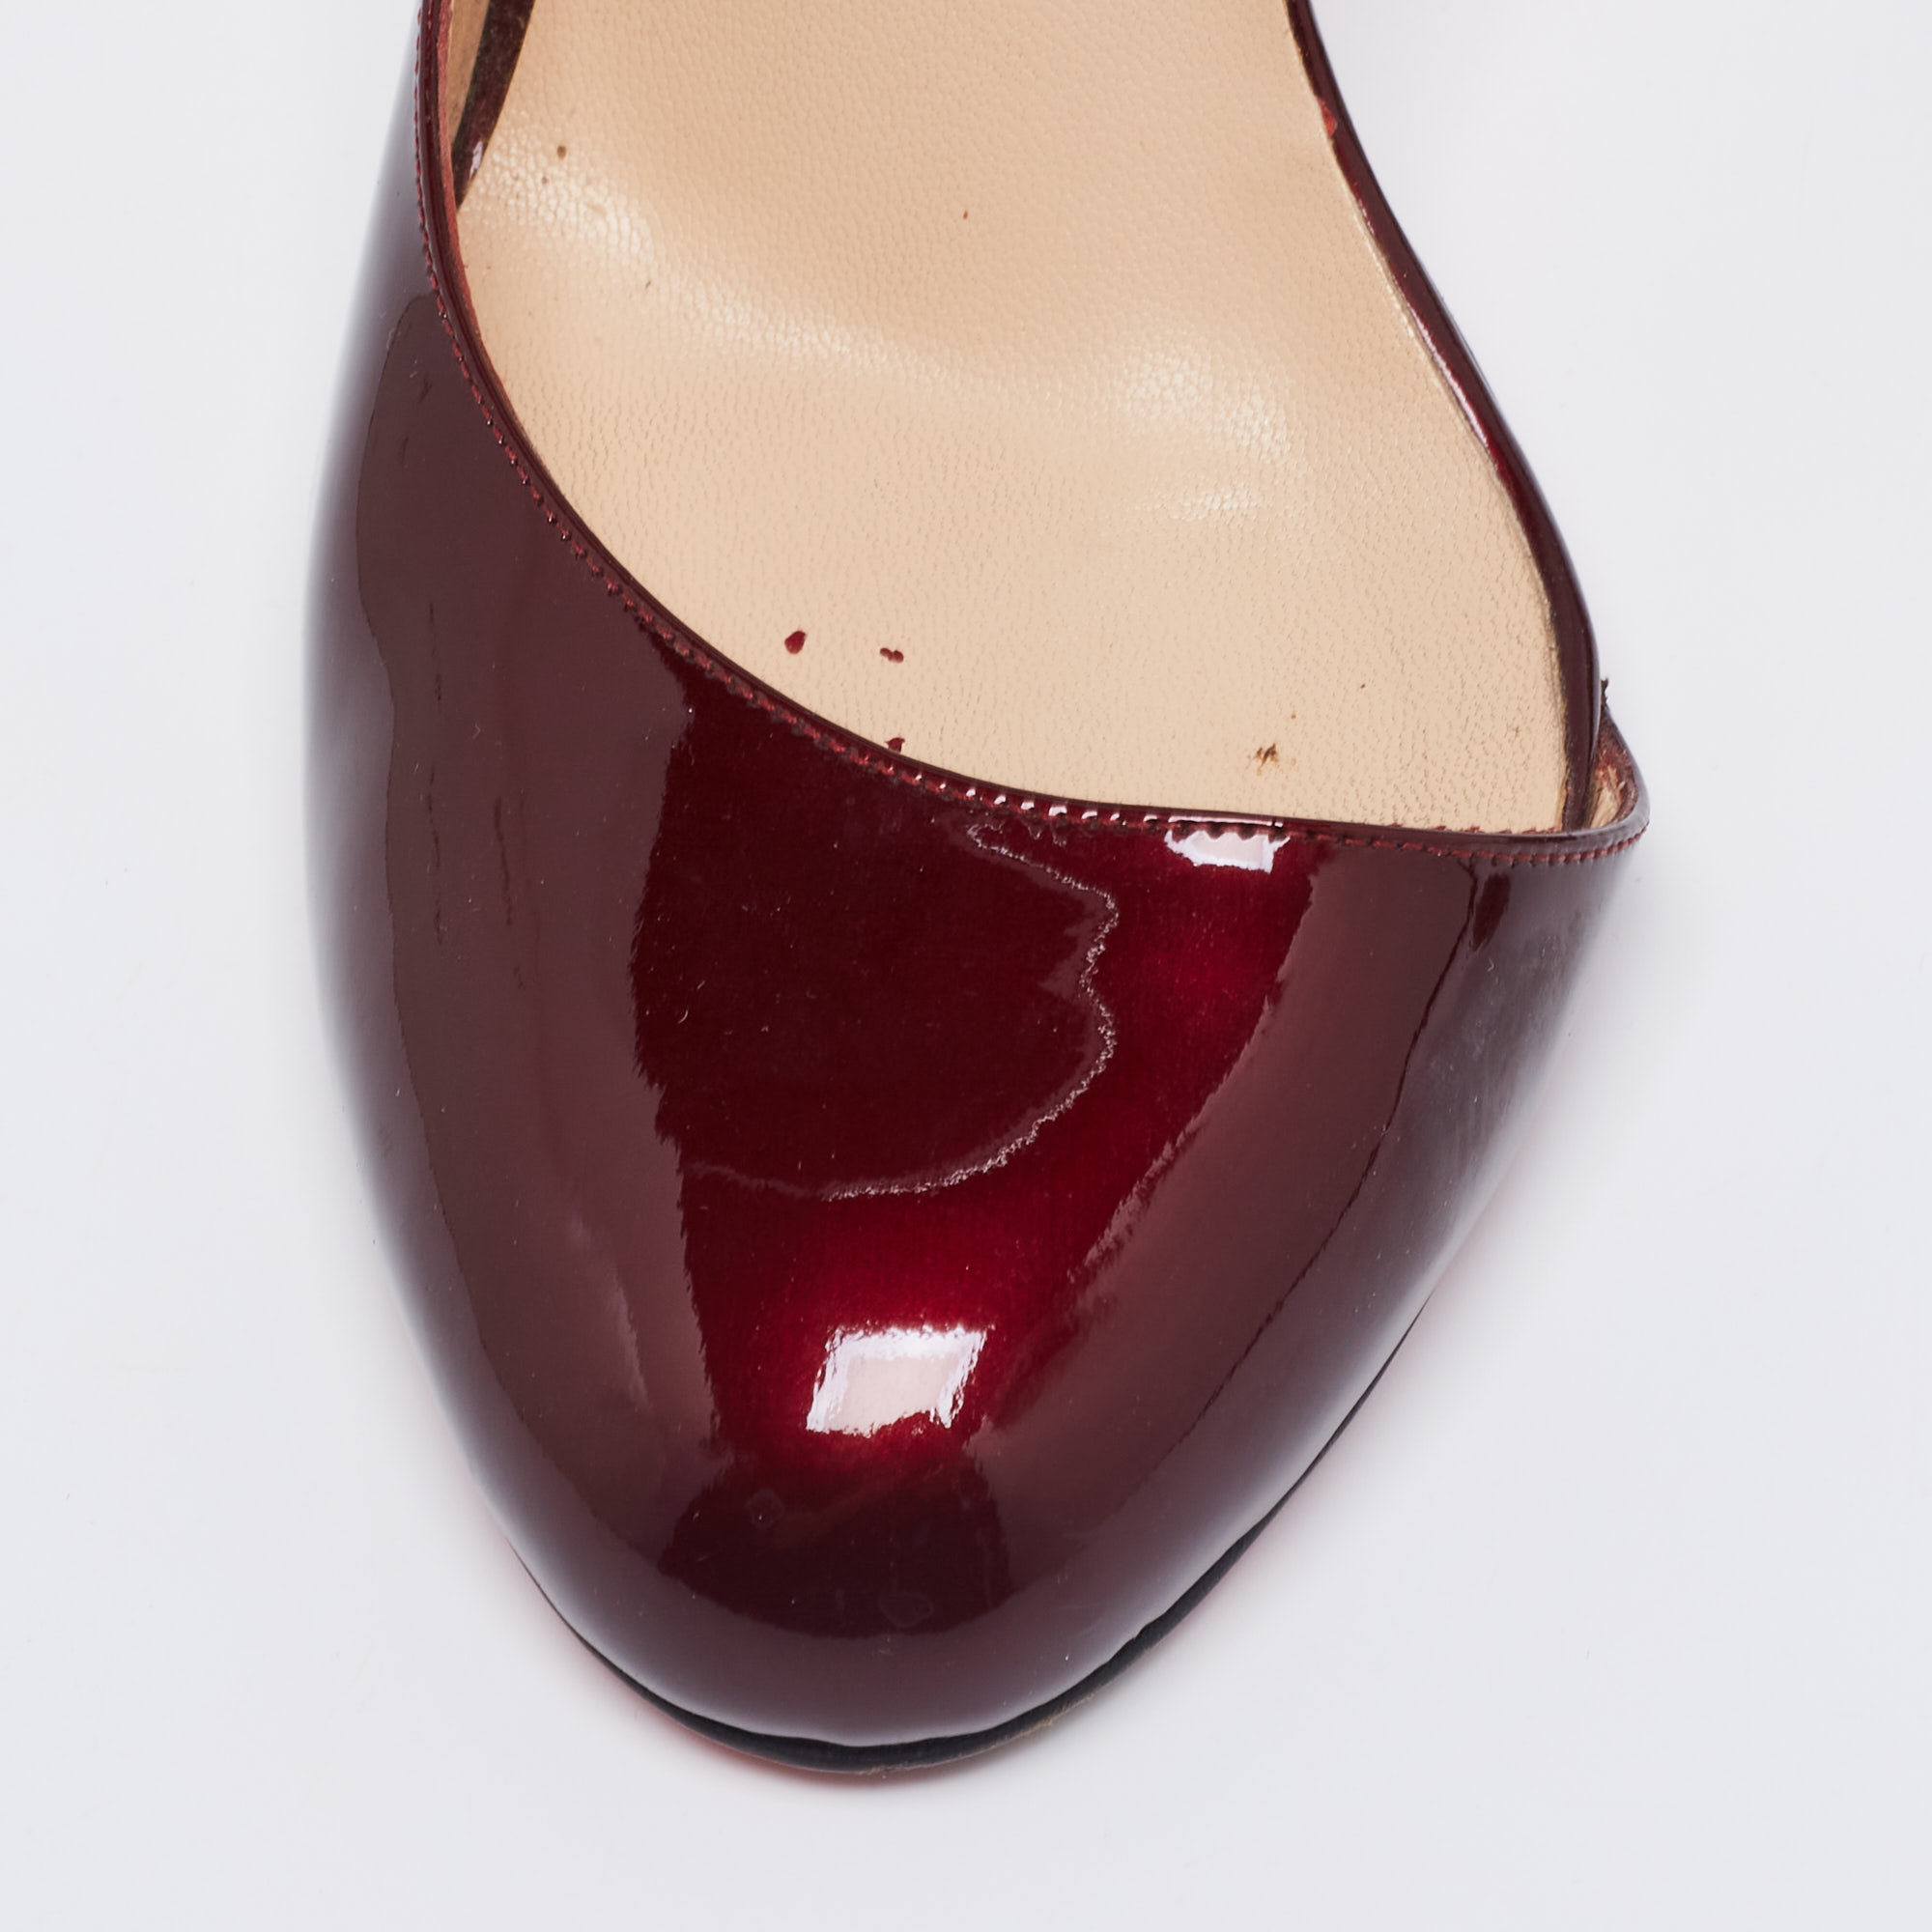 Christian Louboutin Burgundy Patent Leather Helmour D'orsay Pumps Size 39